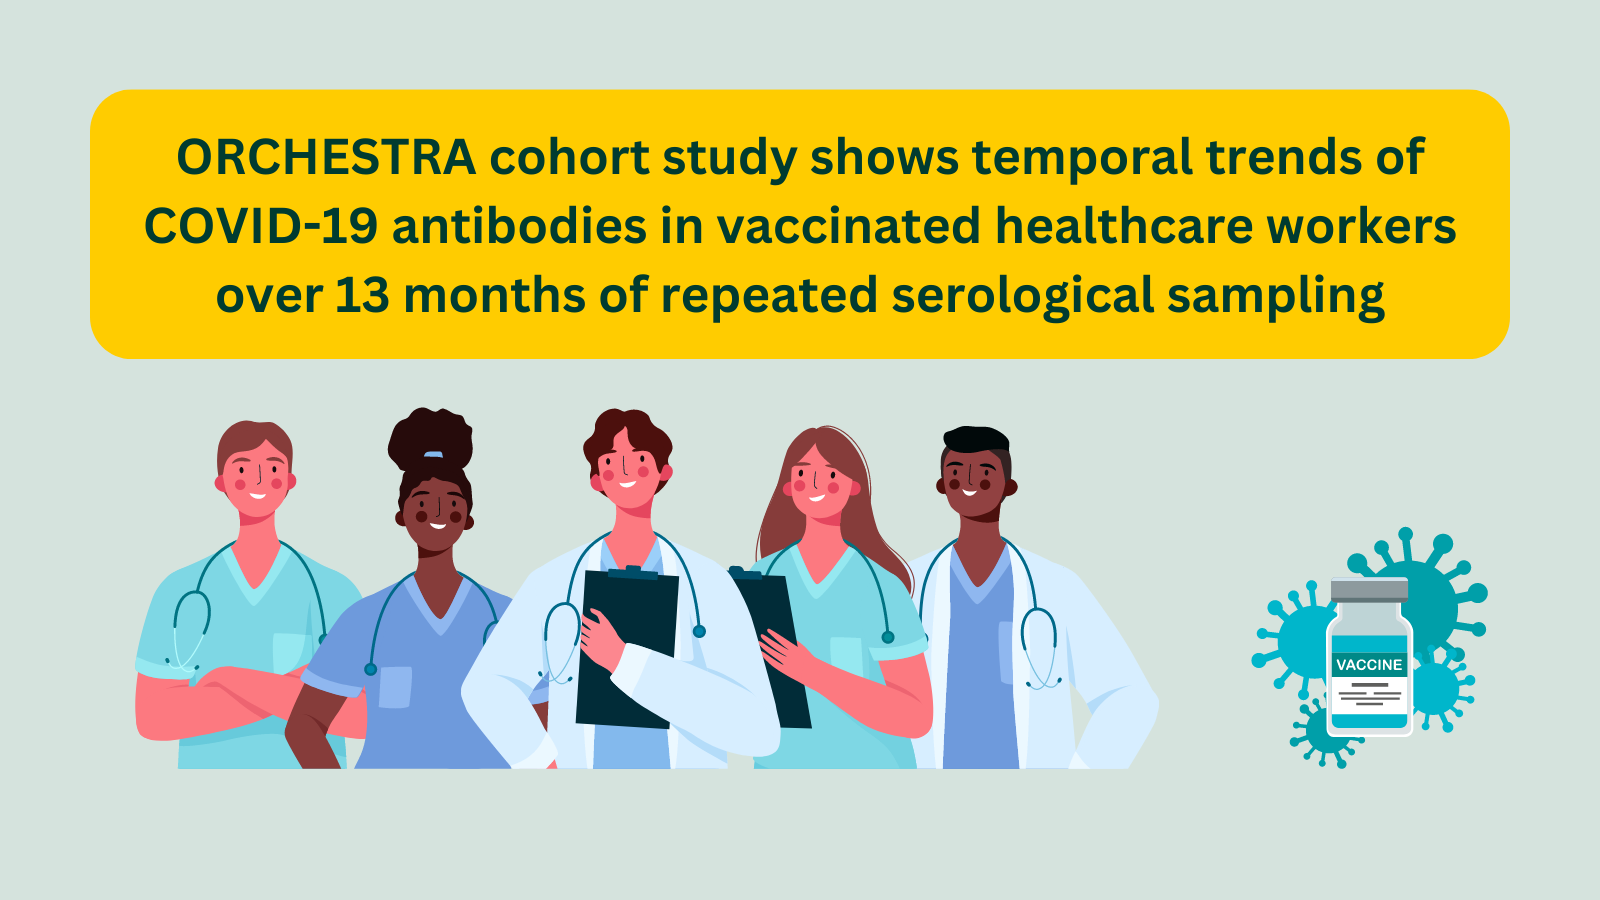 ORCHESTRA cohort study shows temporal trends of COVID-19 antibodies in vaccinated healthcare workers over 13 months of repeated serological sampling